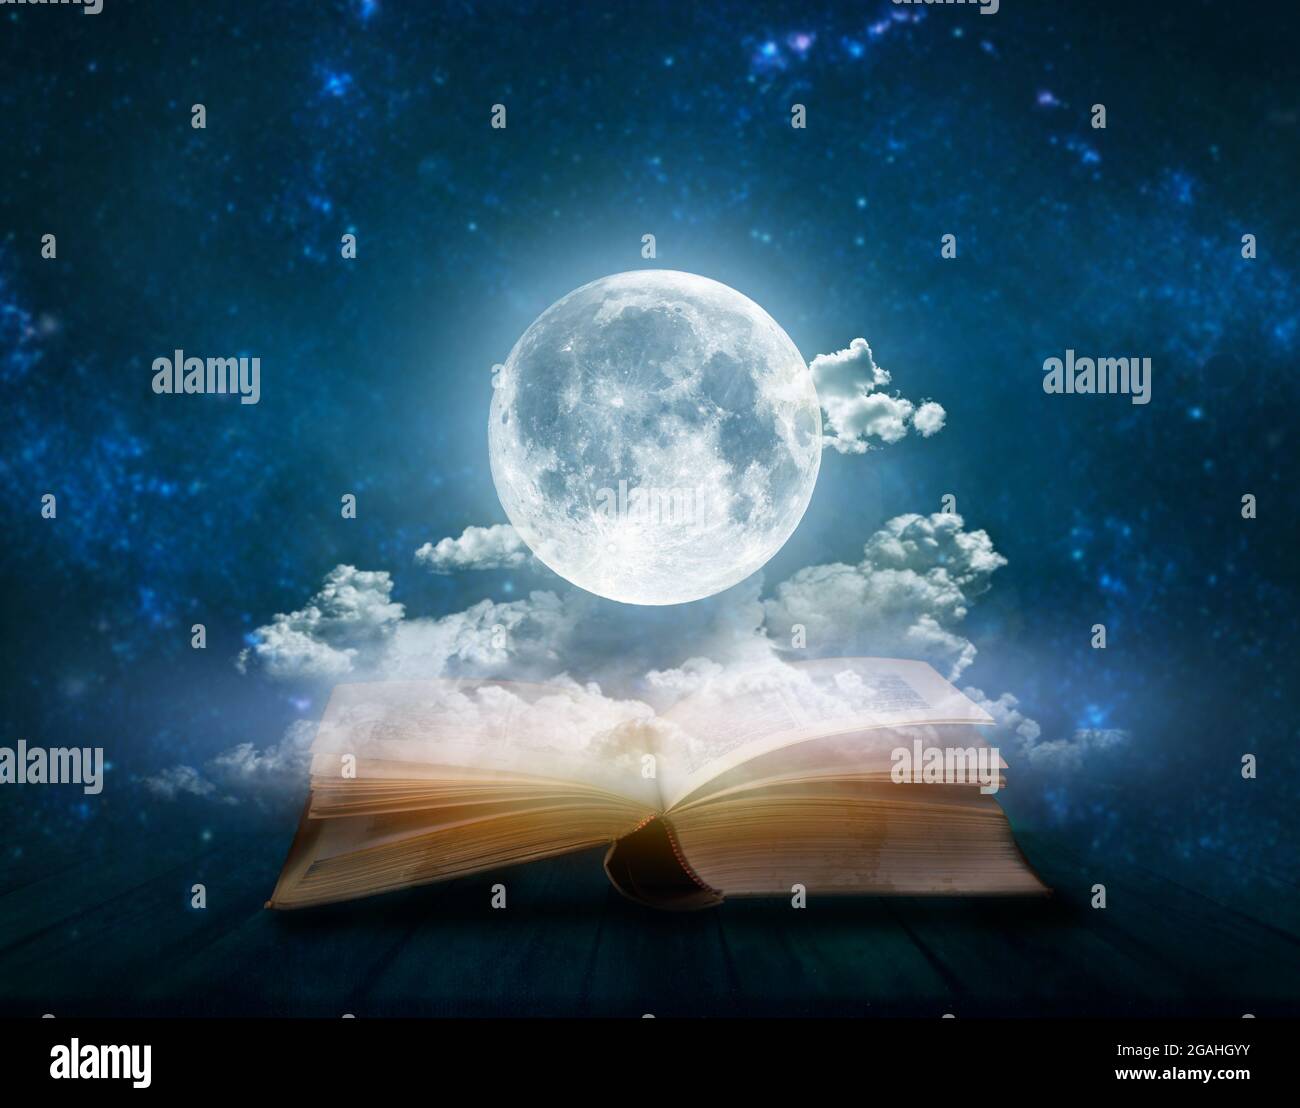 Full moon above open pages of old book; Astrology, zodiac, esoteric concept Stock Photo